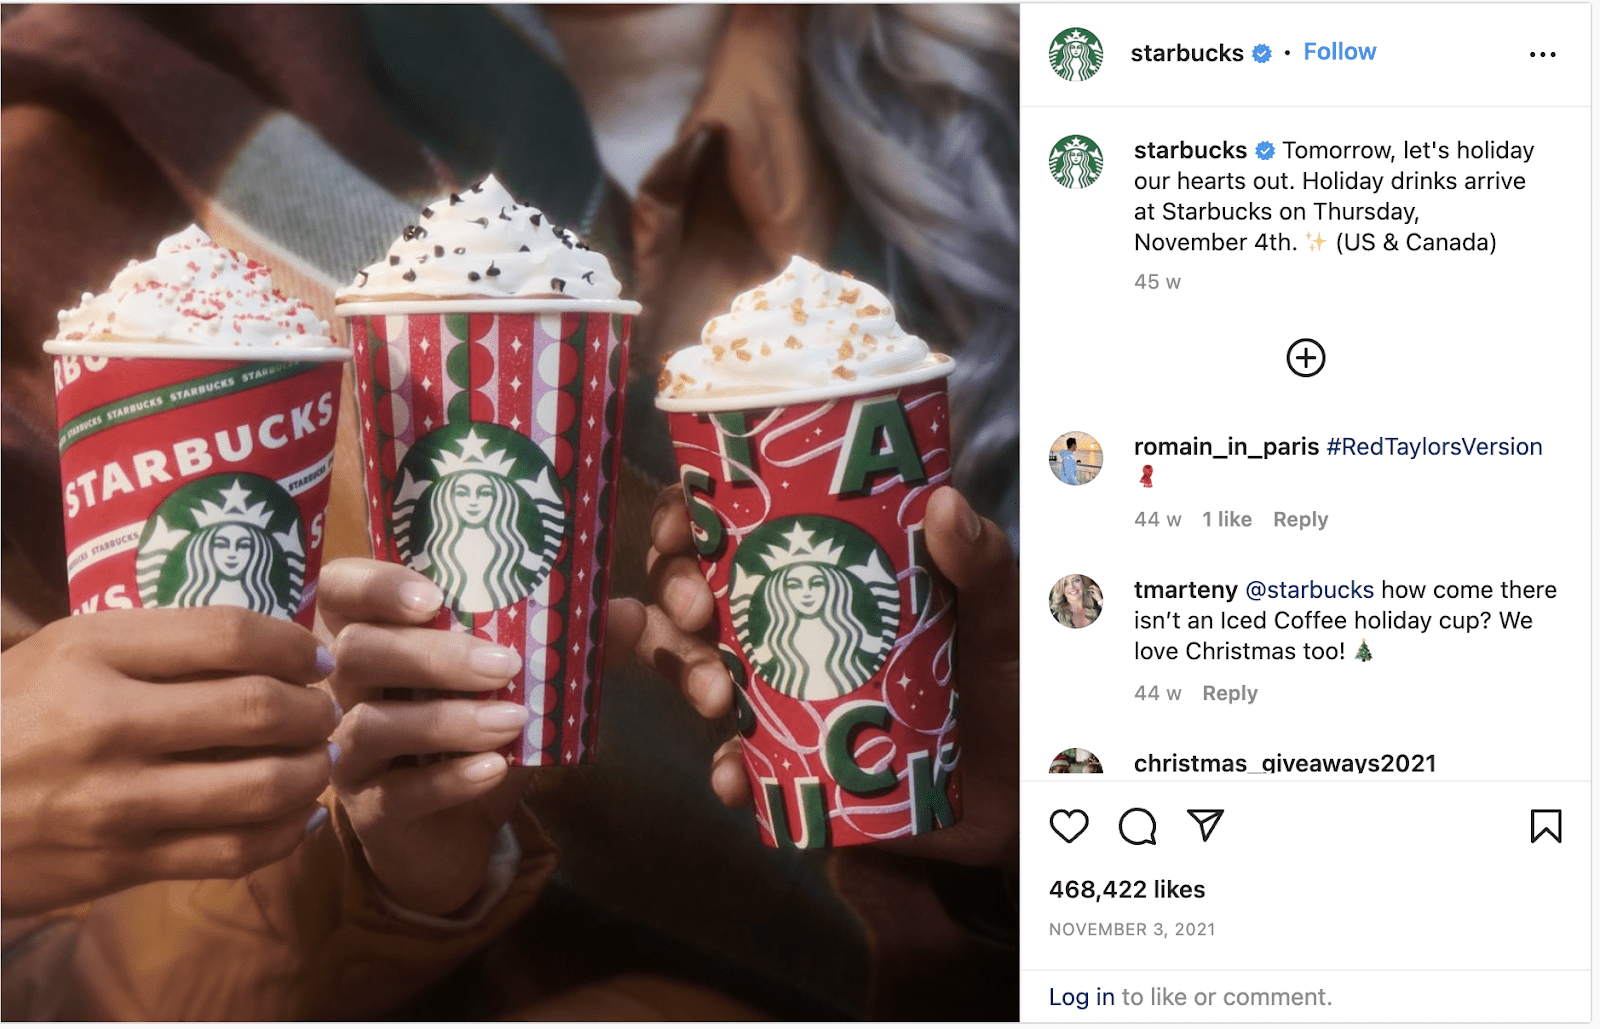 This holiday marketing social media post by Starbucks shows three red coffee cups with Christmas colors. 